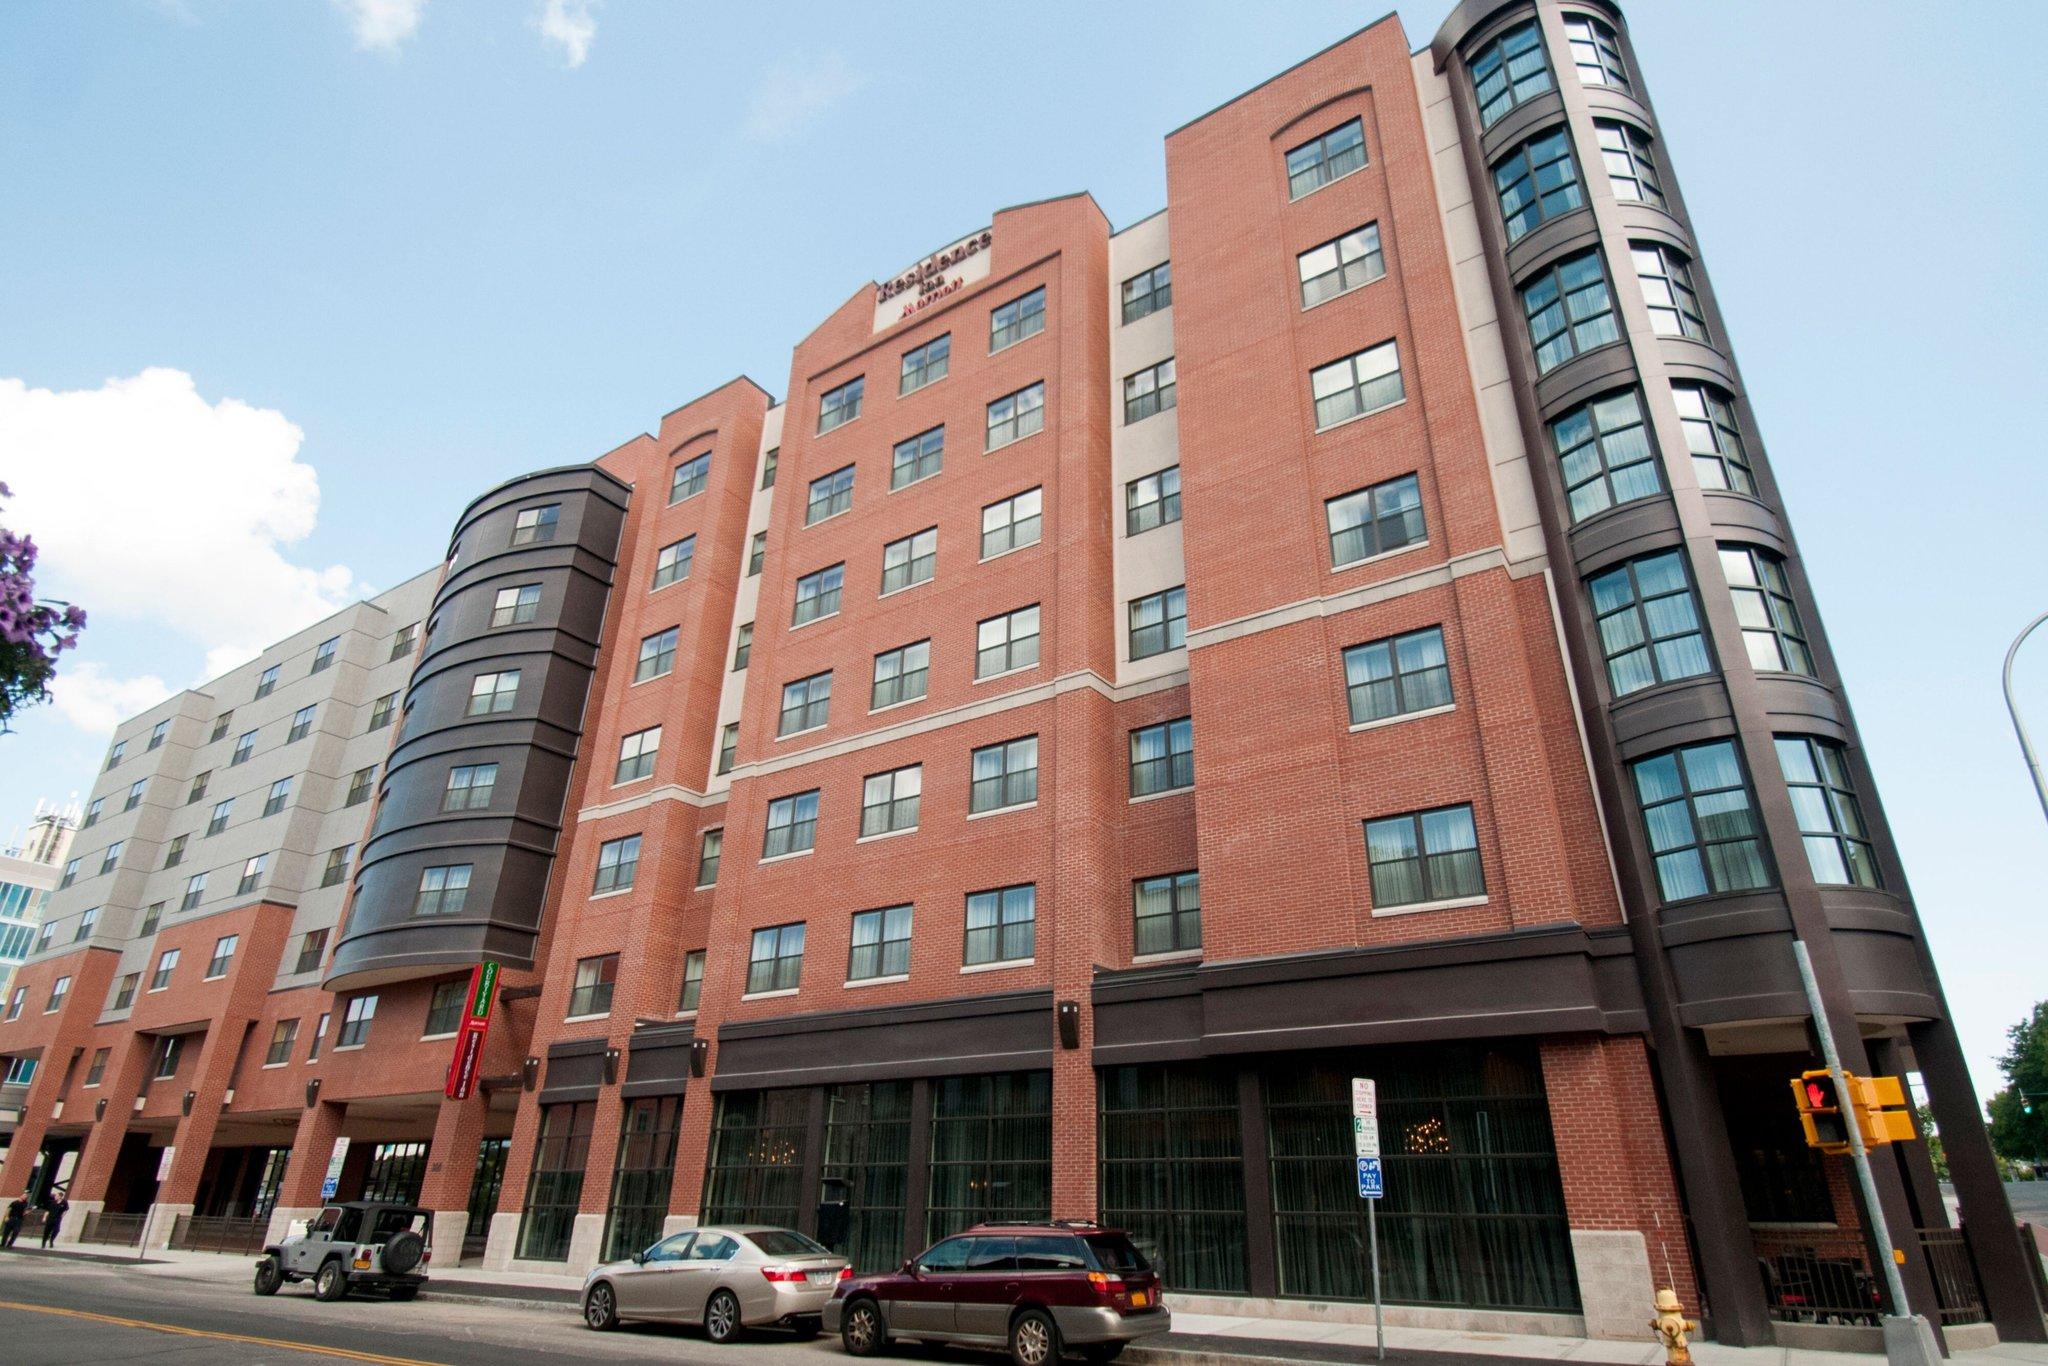 Residence Inn Syracuse Downtown at Armory Square in Syracuse, NY